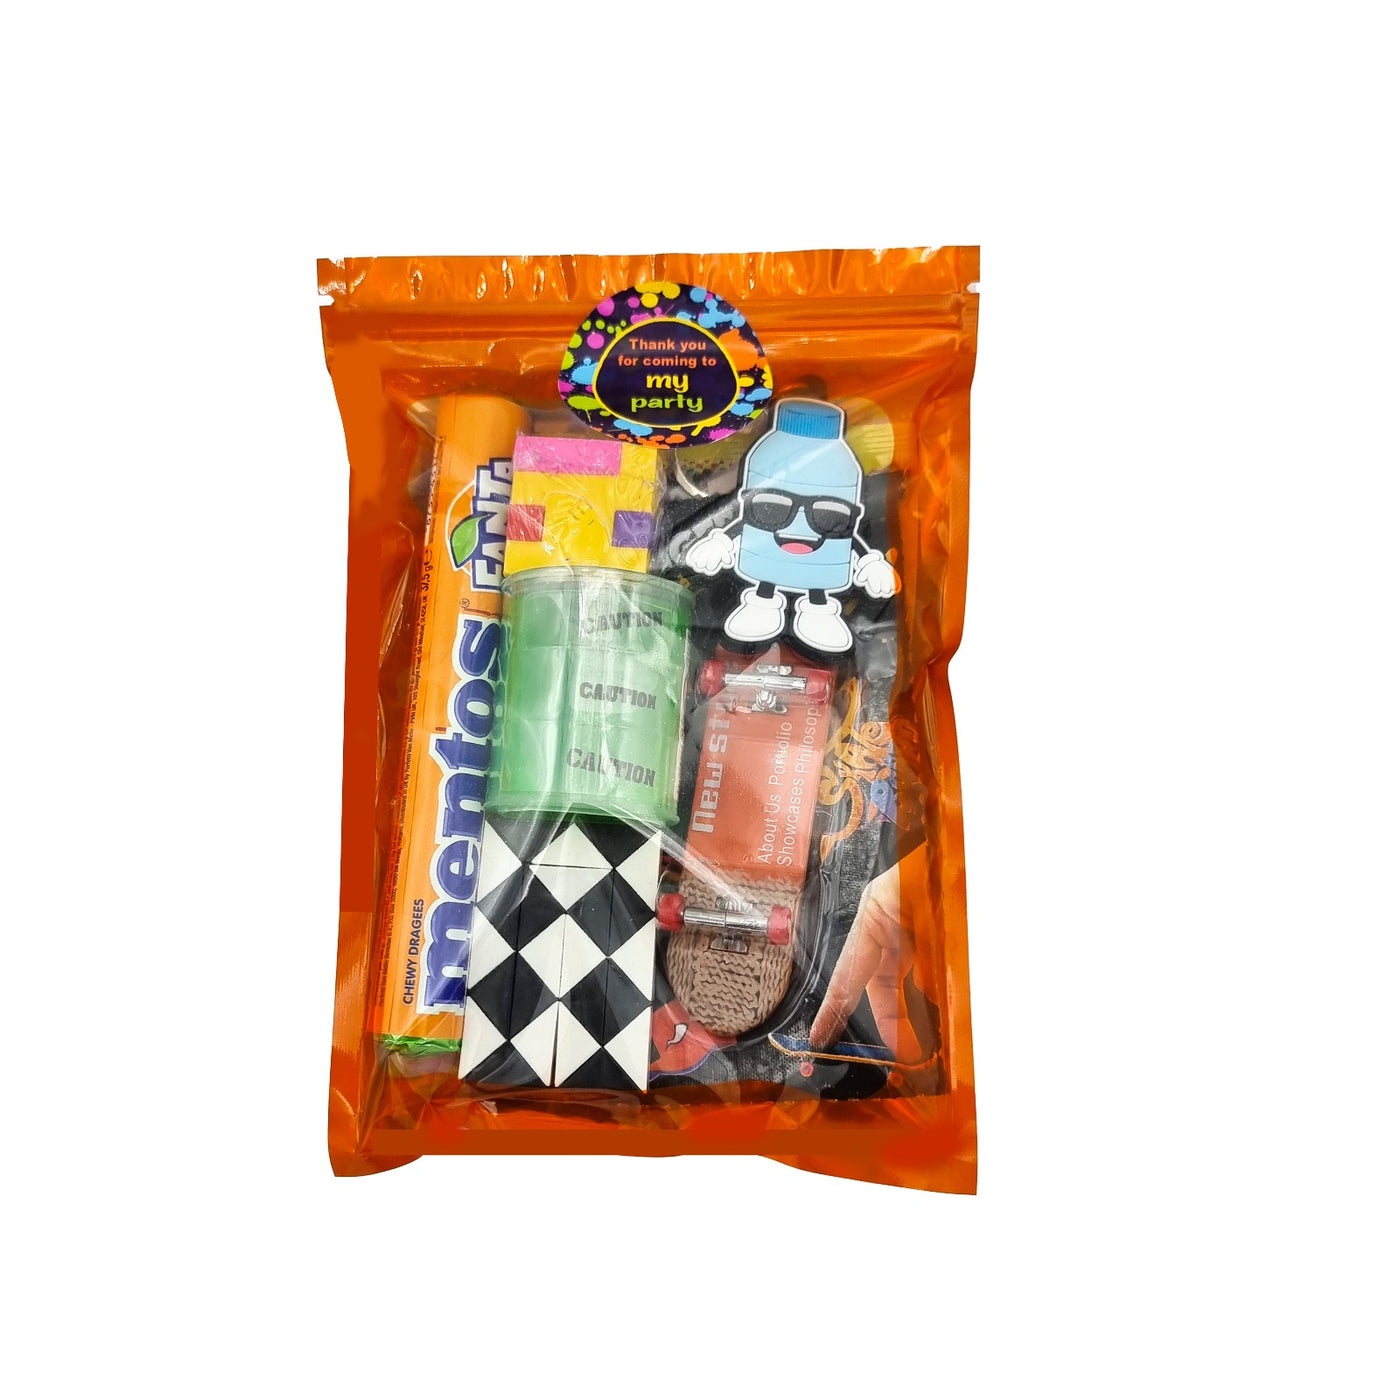 Older Boys Pre Filled Birthday Skateboarding Goody Bags With Toys And Sweets, Party Favours.